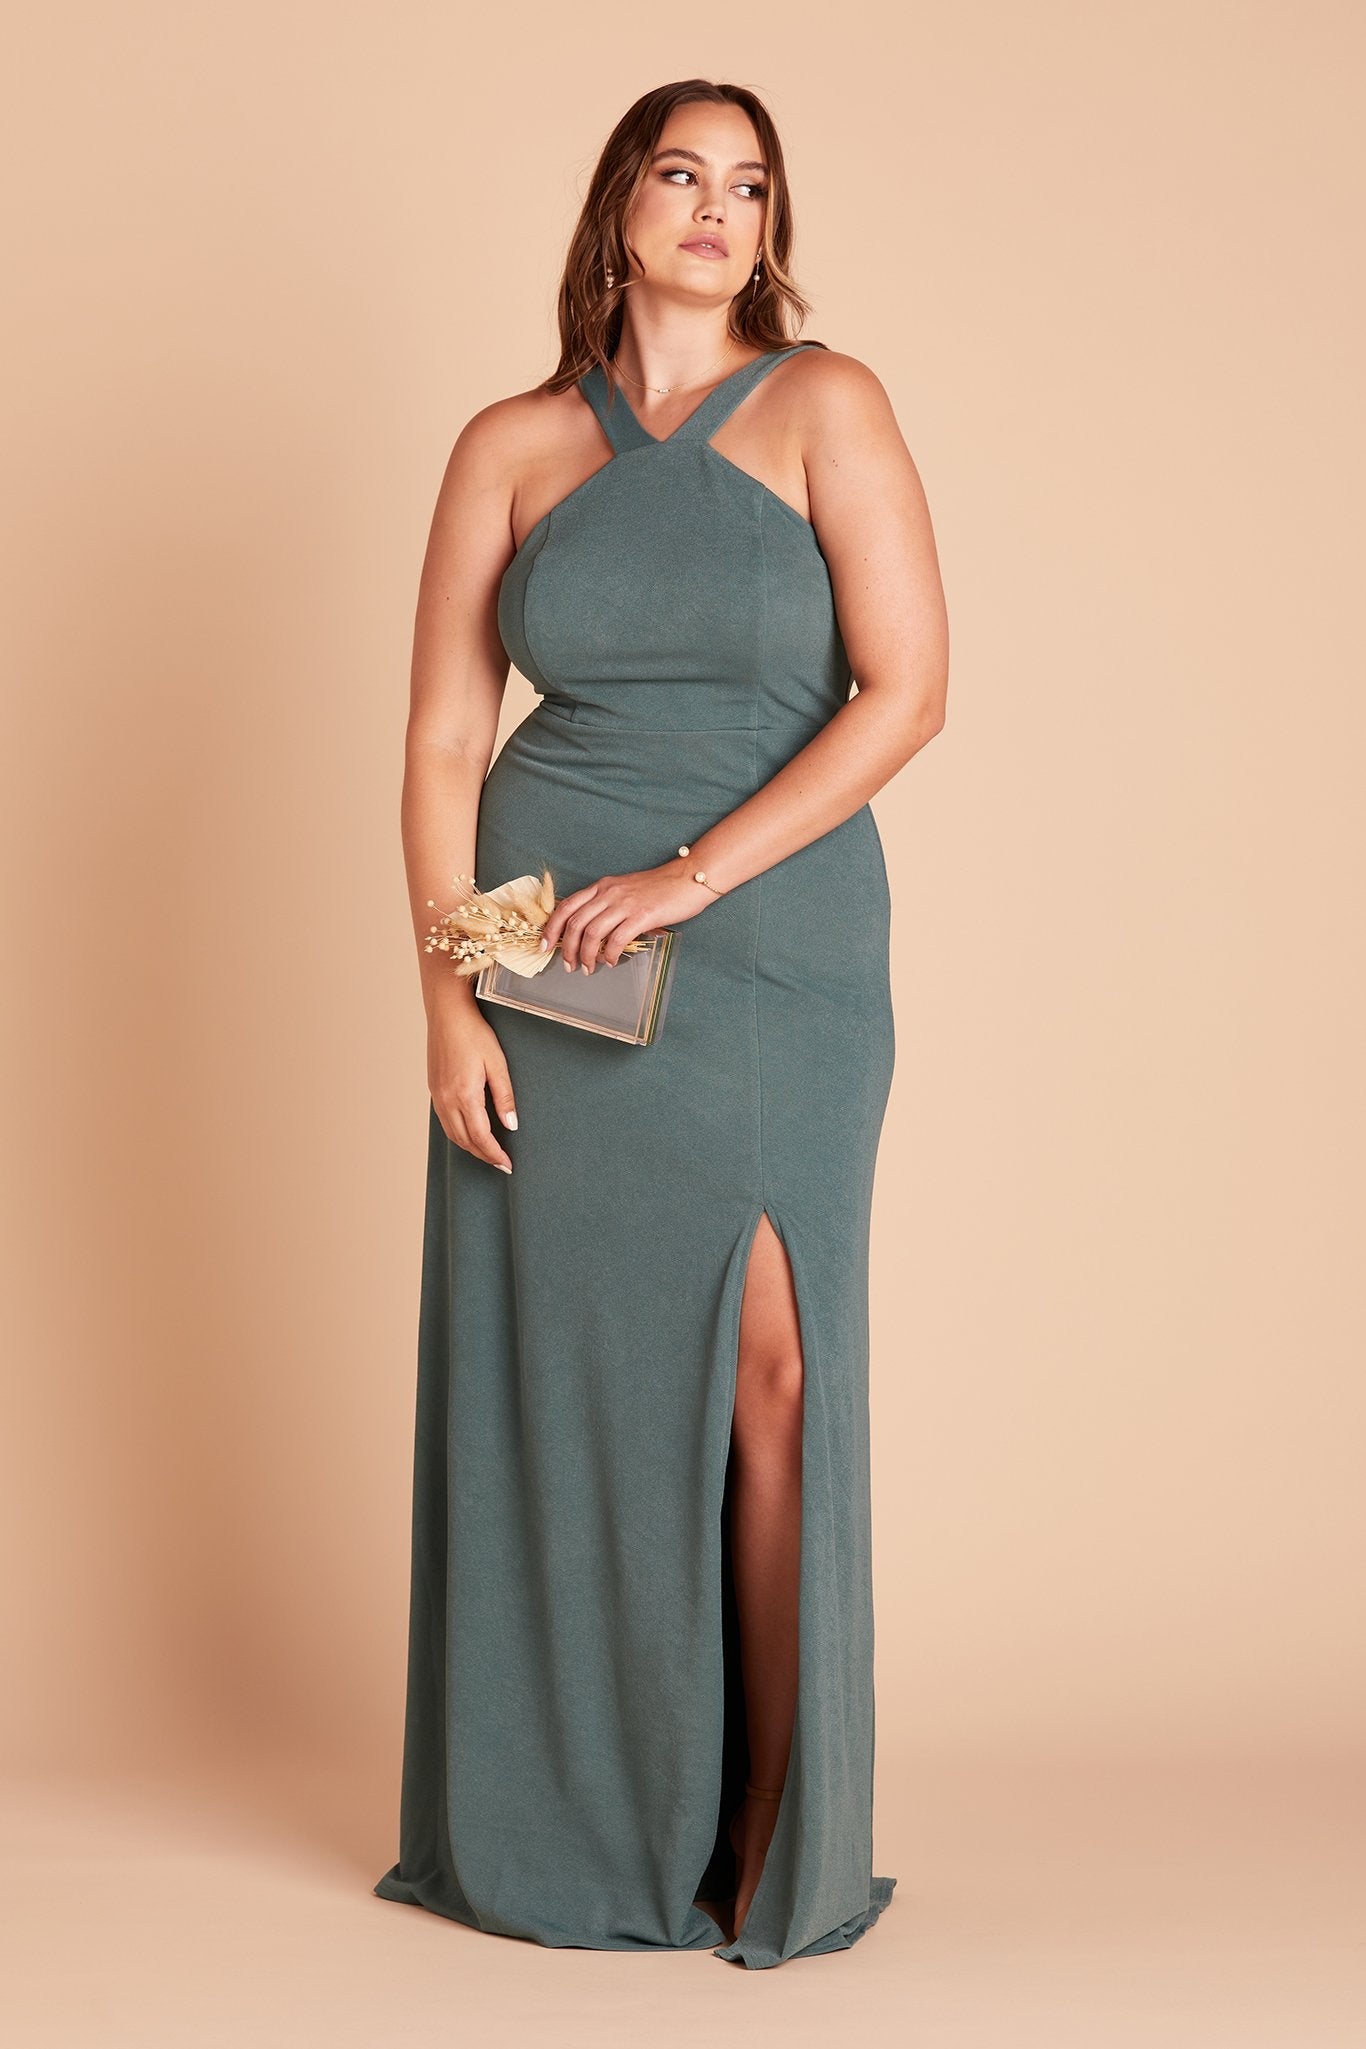 Gene plus size bridesmaid dress with slit in sea glass green crepe by Birdy Grey, front view